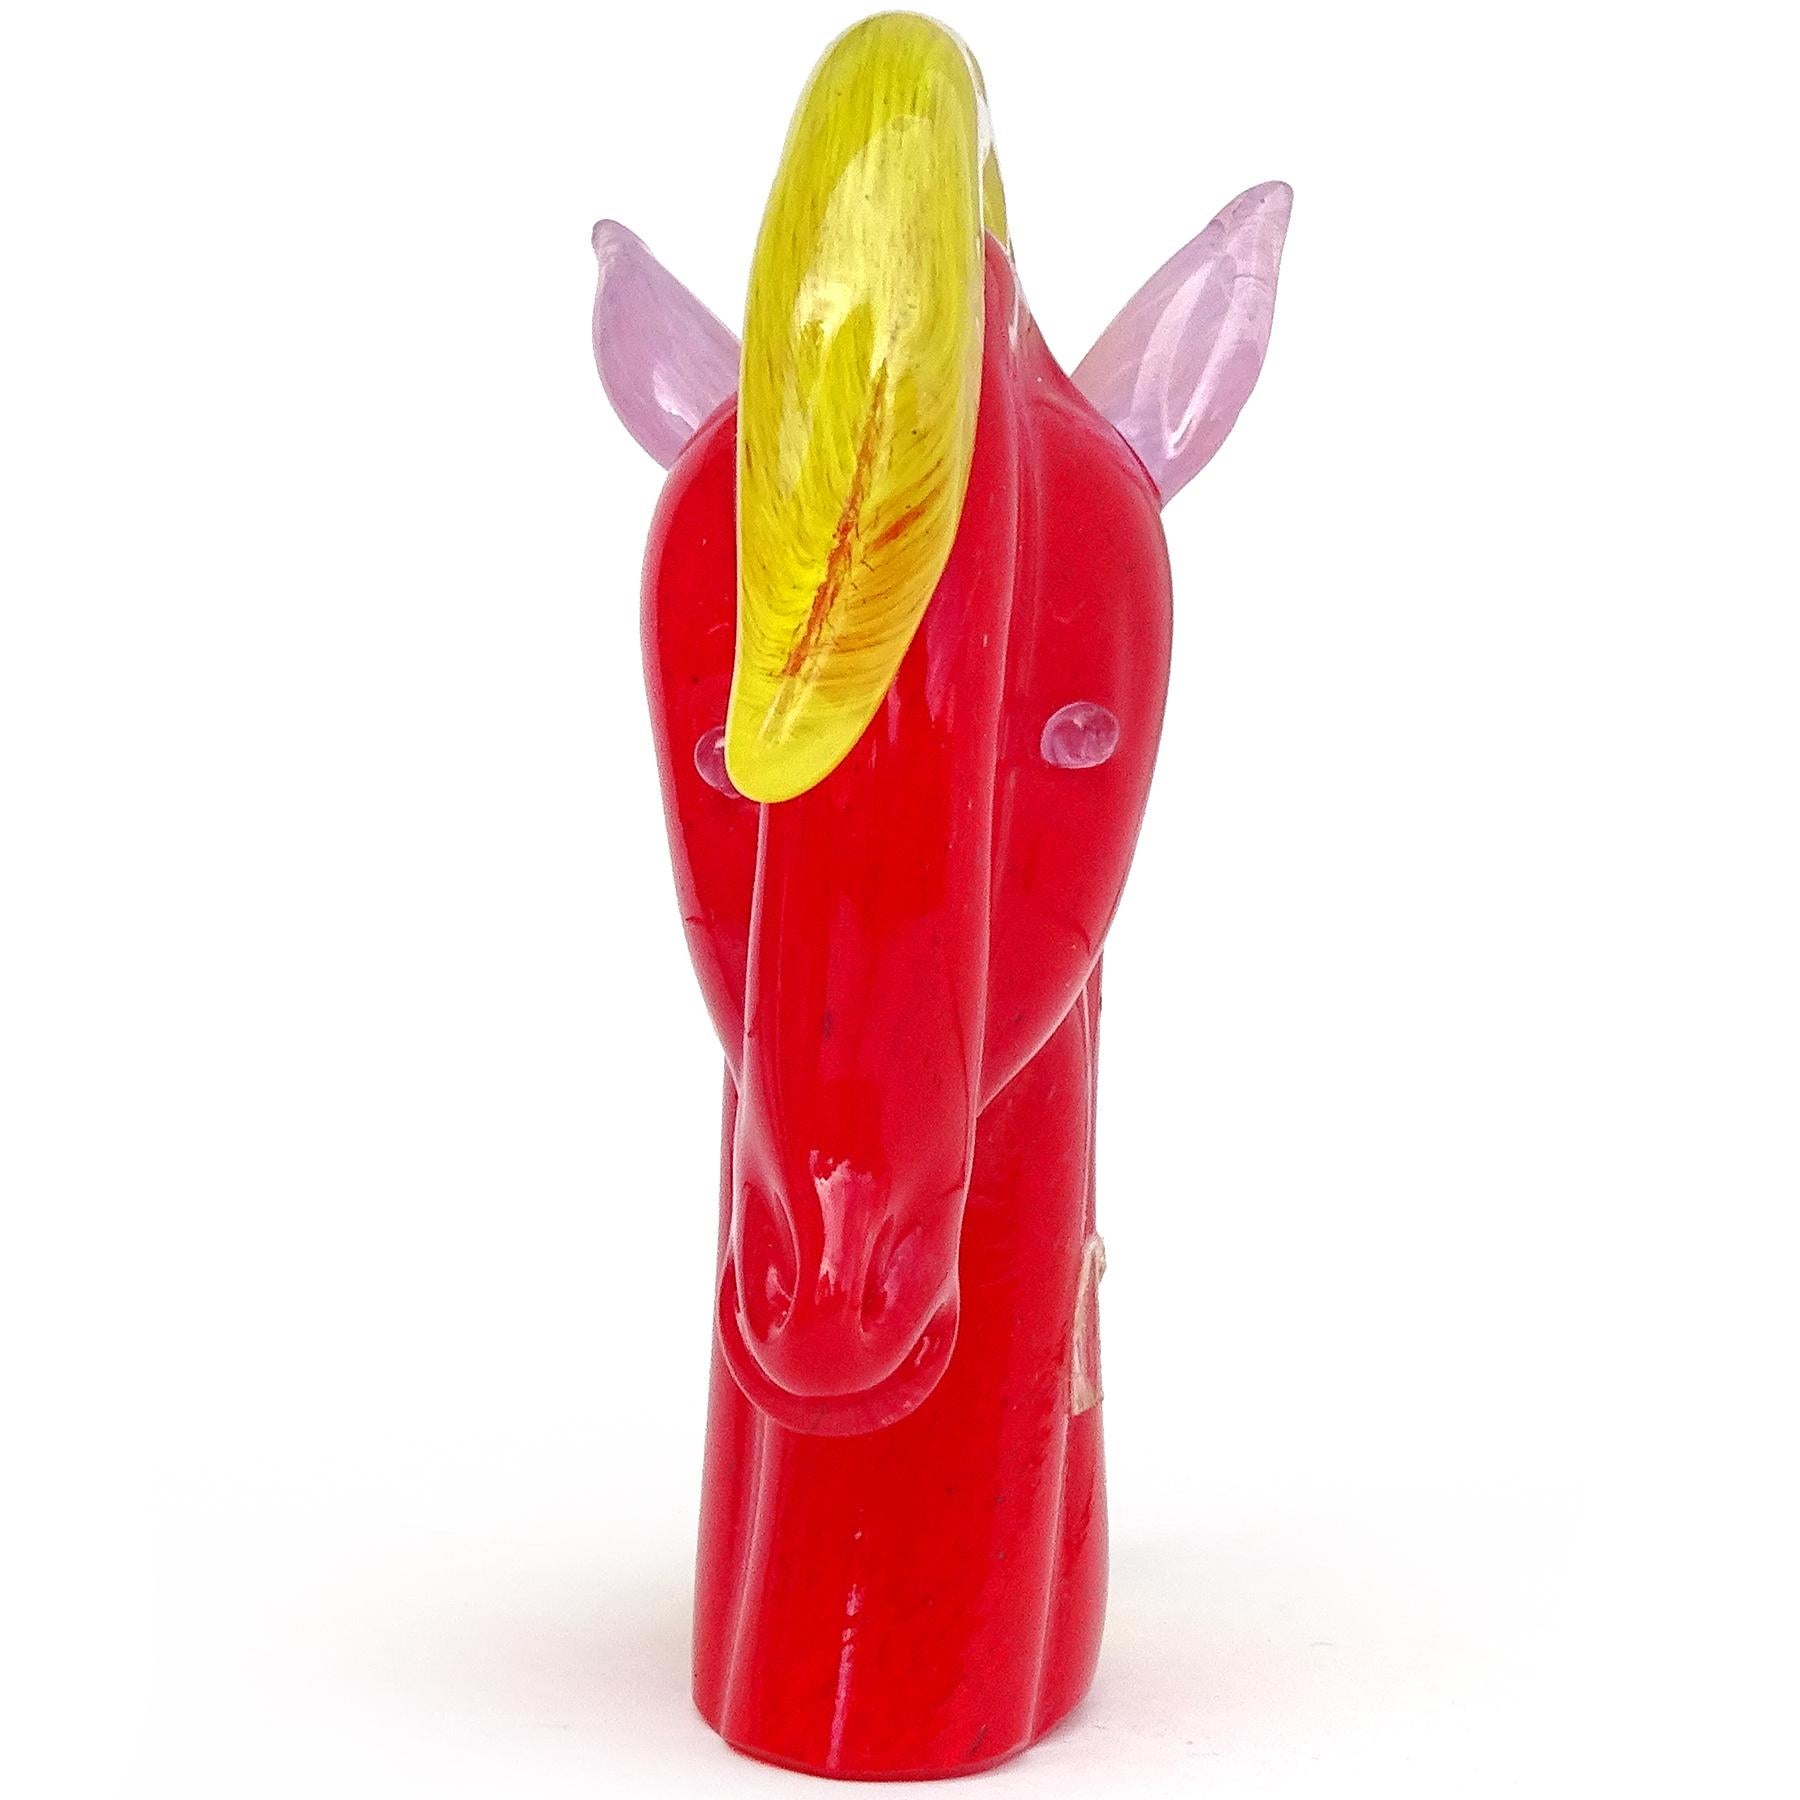 Beautiful vintage Murano hand blown bright red, yellow and lavender Italian art glass horse head figurine / sculpture. The piece is documented to the Gambaro & Poggi company, with an original (but worn at the edges) 